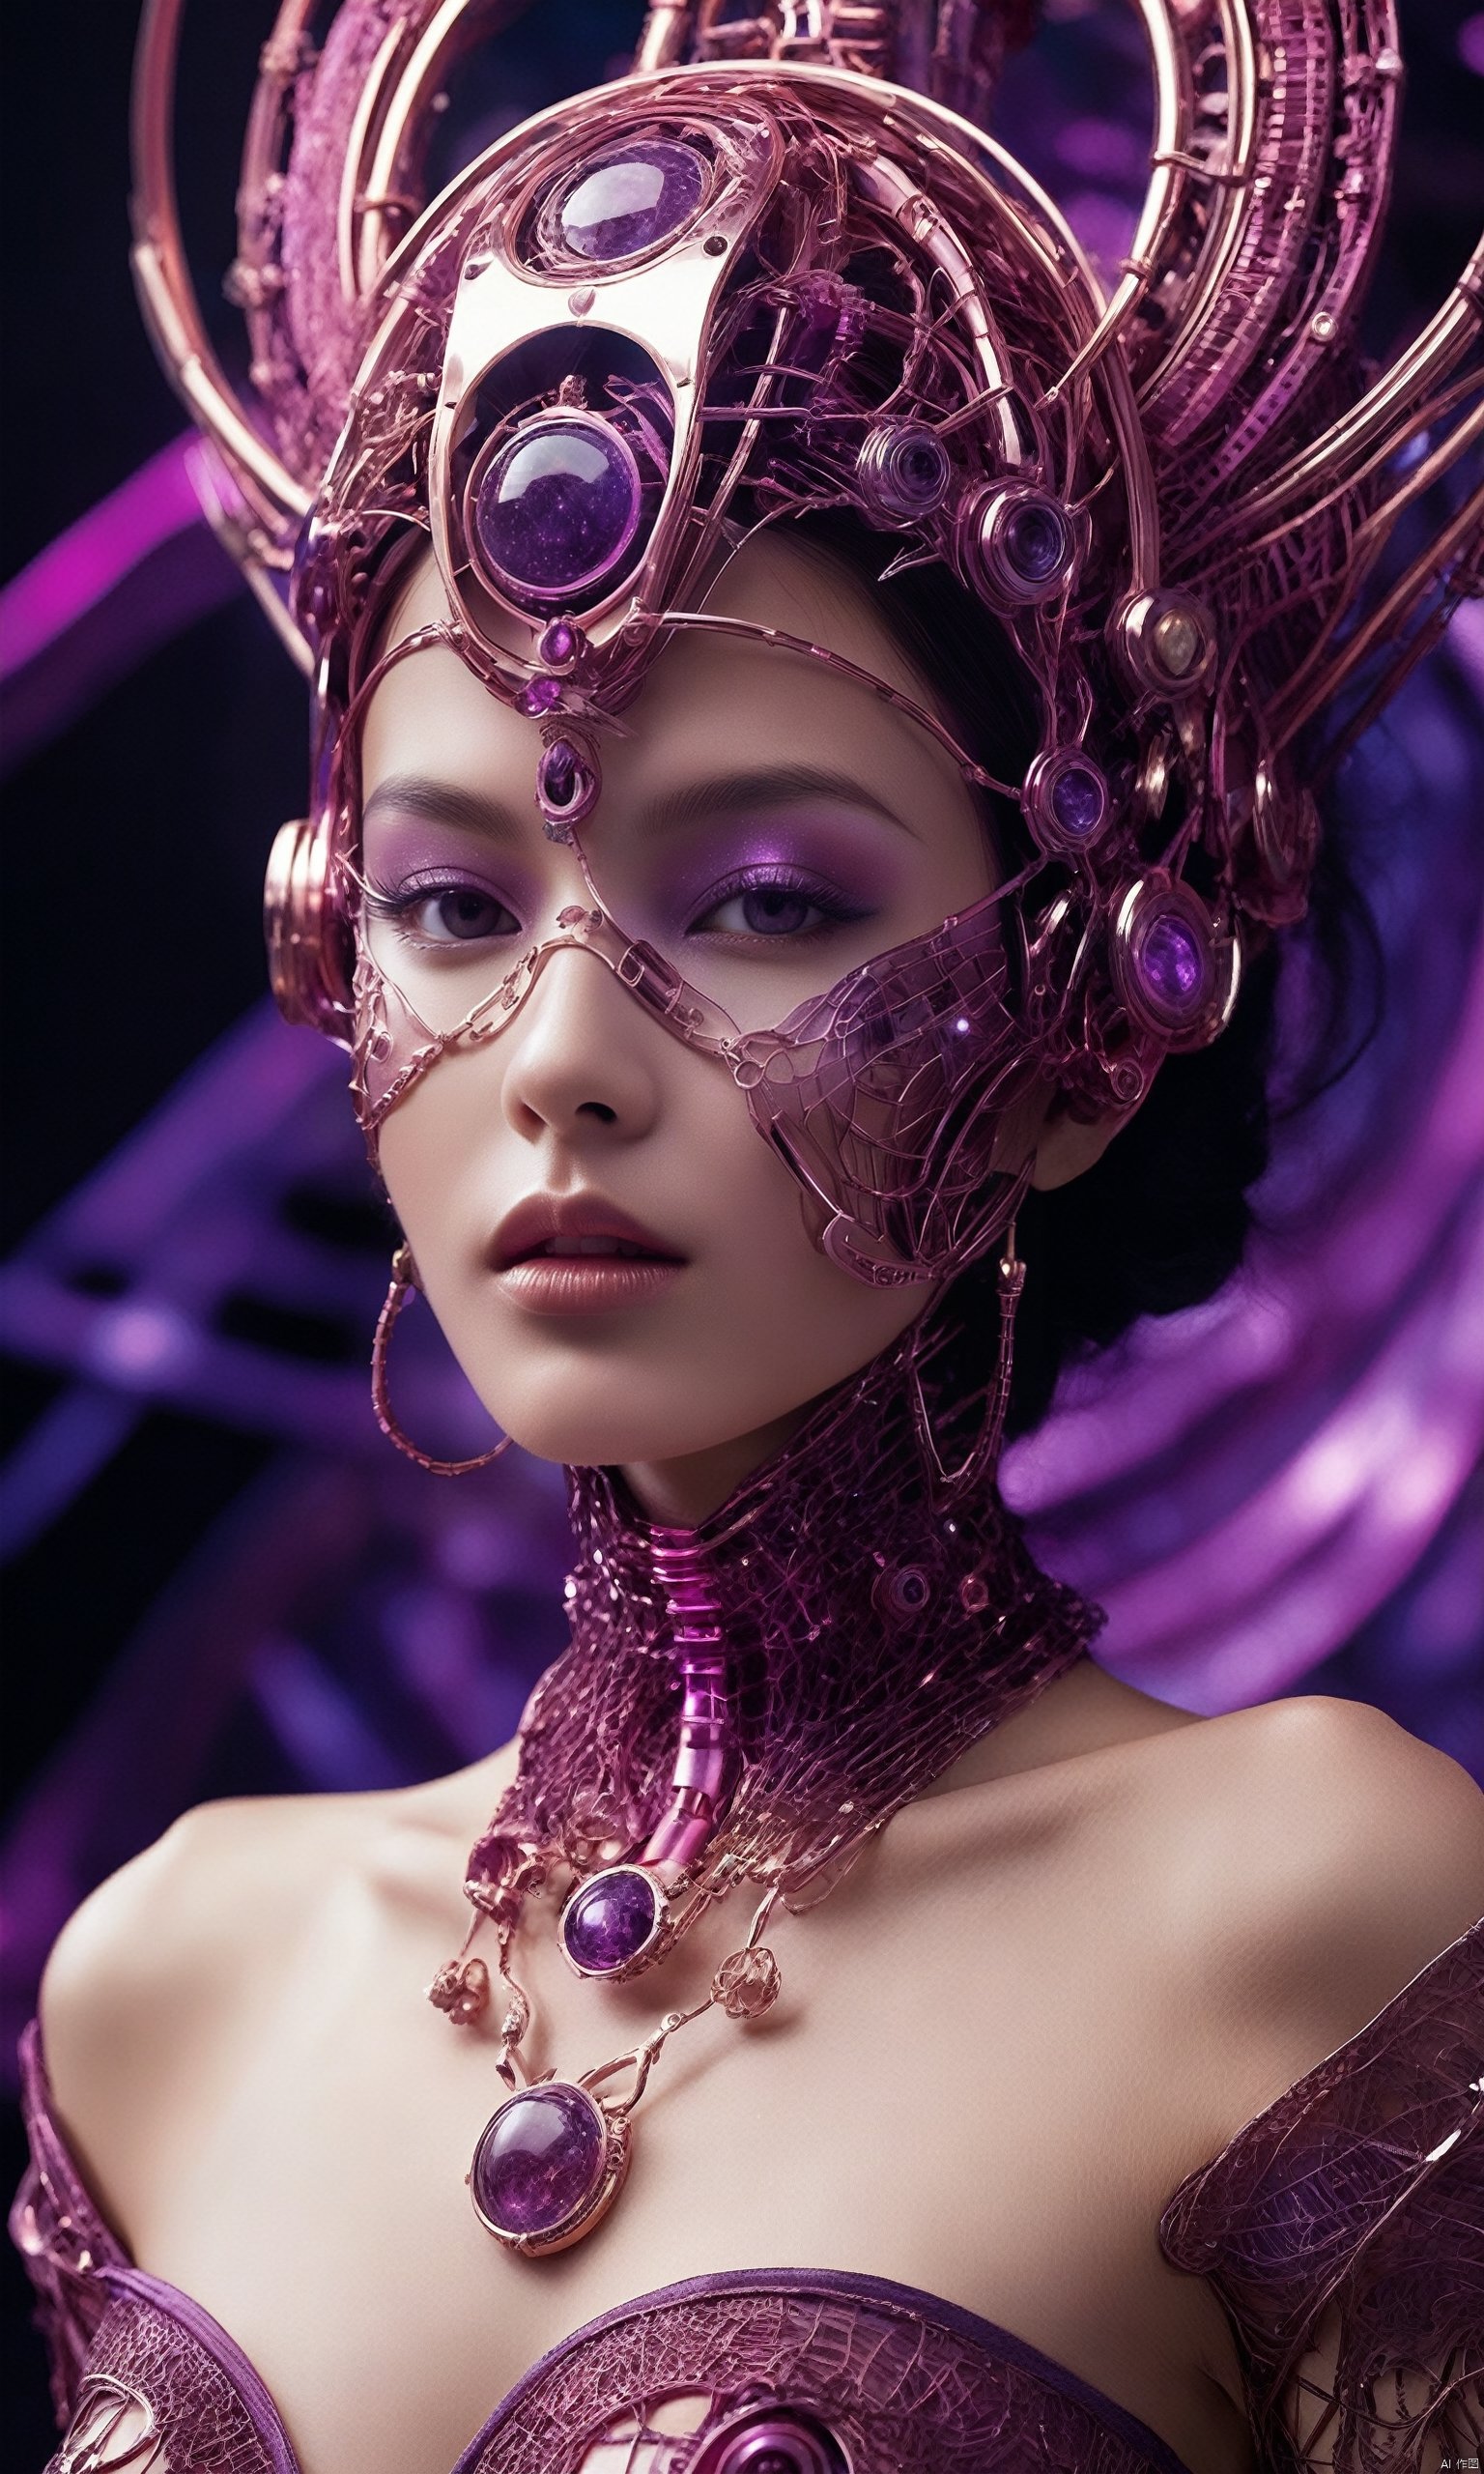  hubggirl,In the cosmic tapestry, a seductive allure unfolds as a sexy robotic enchantress emerges. Bathed in hues of sensuous pink and mysterious purple, she embodies the essence of temptation. Her metallic form, intricately designed, resonates with a captivating energy that transcends the boundaries of artificial beauty. Eyes gleaming with a provocative spark, she beckons with an otherworldly charm, blending the cosmic enchantment with the enticing allure of her mechanical grace. Amidst the cosmic expanse, this ethereal entity blurs the lines between desire and the celestial, creating a scene where the cosmos and seduction converge in a mesmerizing dance.